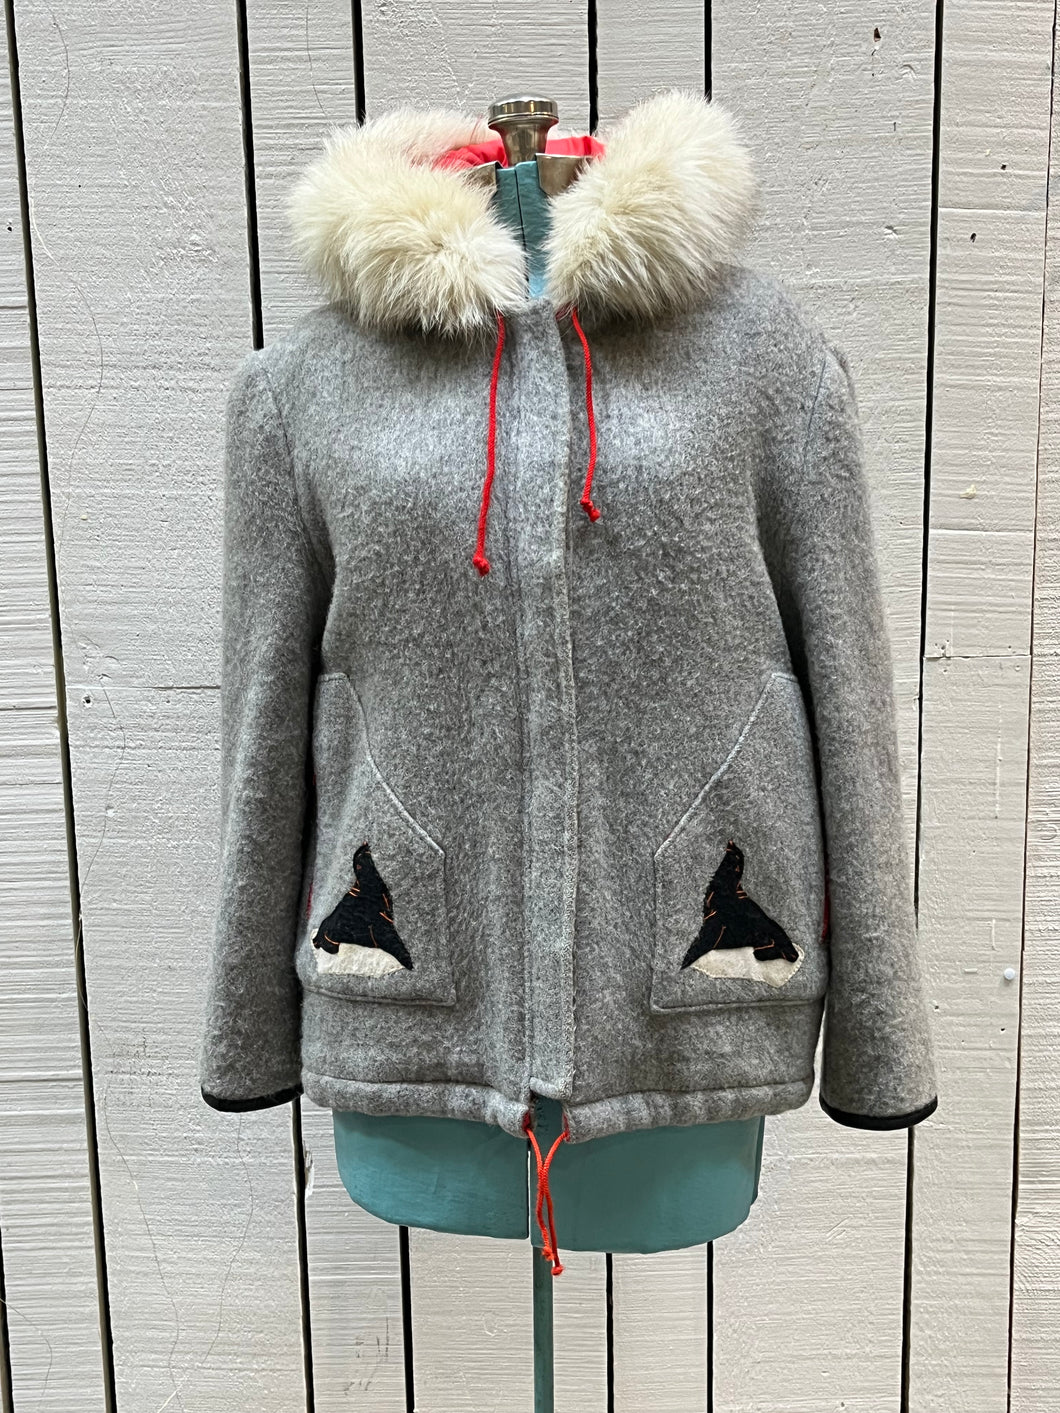 Vintage James Bay100% wool grey northern parka with fox fur trimmed hood, zipper closure, zip front pockets, leather trimmed cuffs, drawstring at waist, quilted lining and felt applique in a seal motif.

Made in Canada
Chest 44”